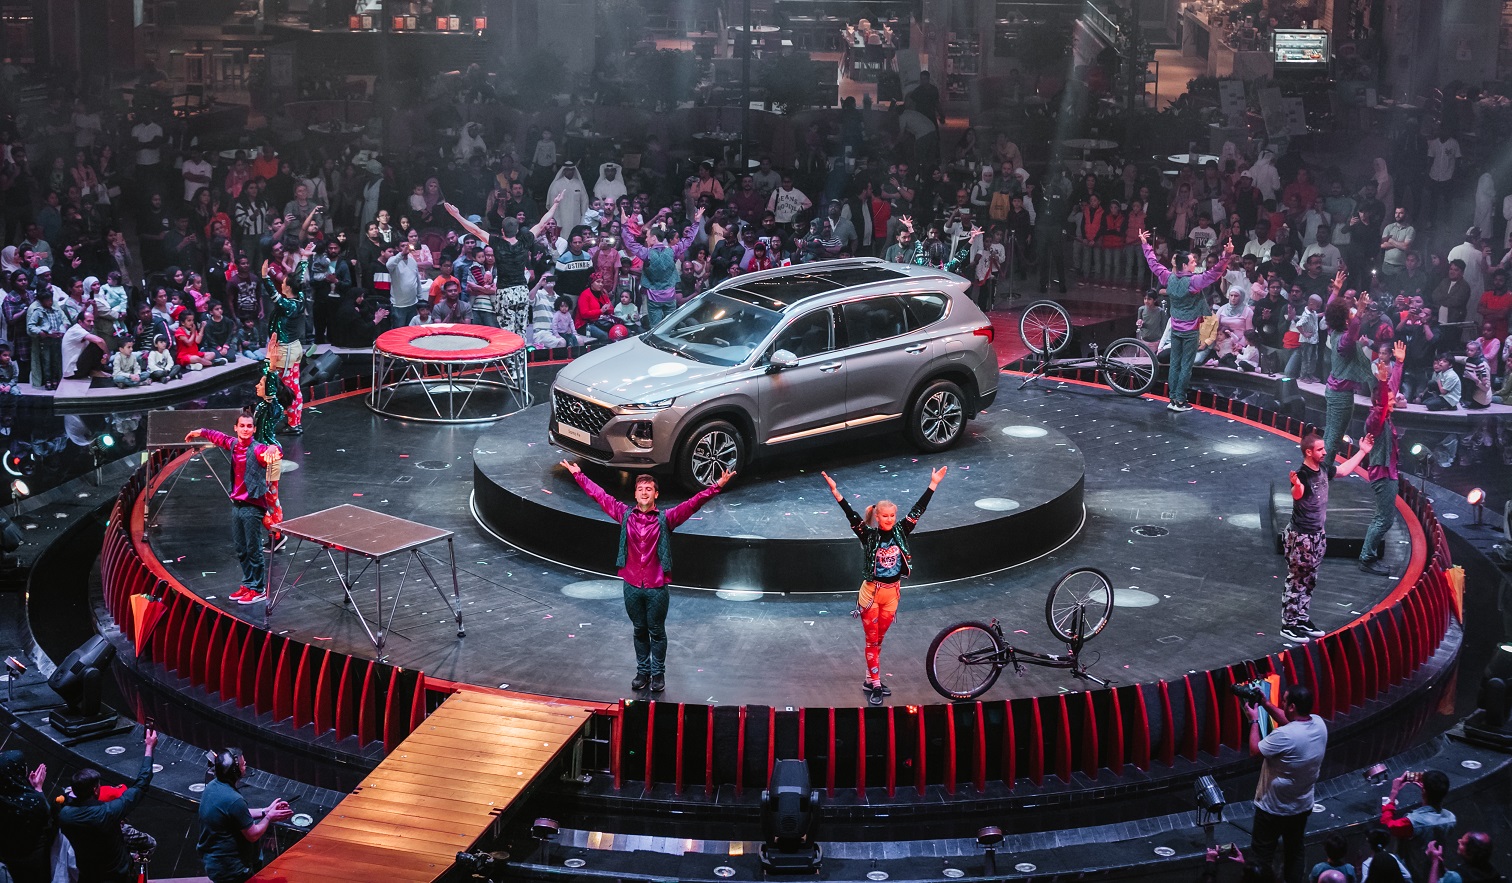 Skyline Automotive revealed the All-New Hyundai Santa Fe directly to the Public at Mall of Qatar